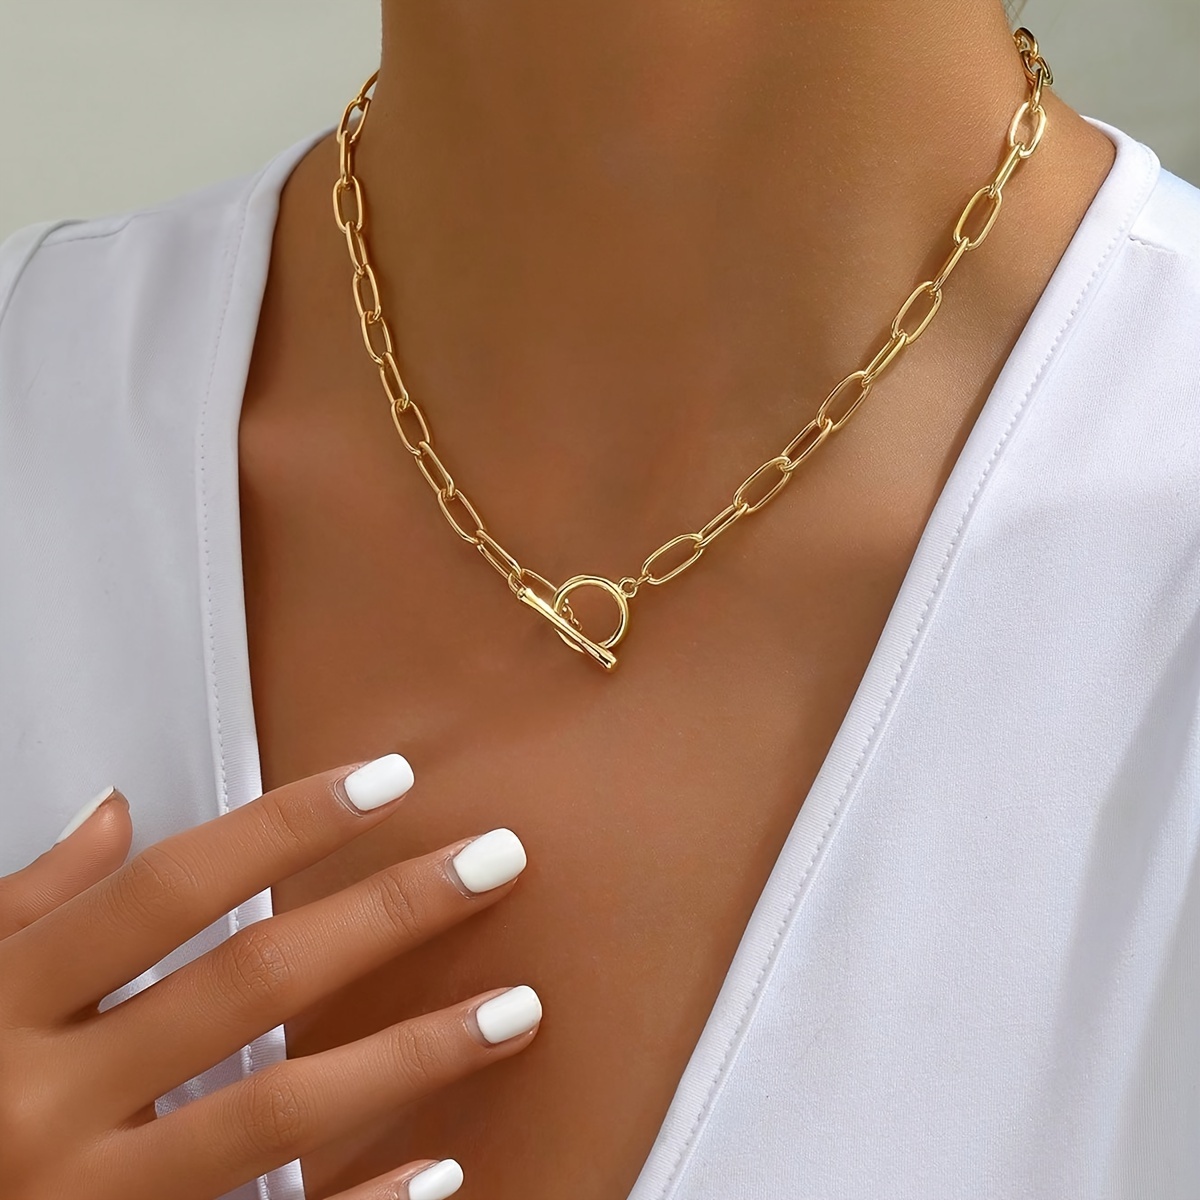 

Golden Ot Necklace Minimalist Paperclip Shaped Clavicle Necklace Stylish Personalized Neck Jewelry